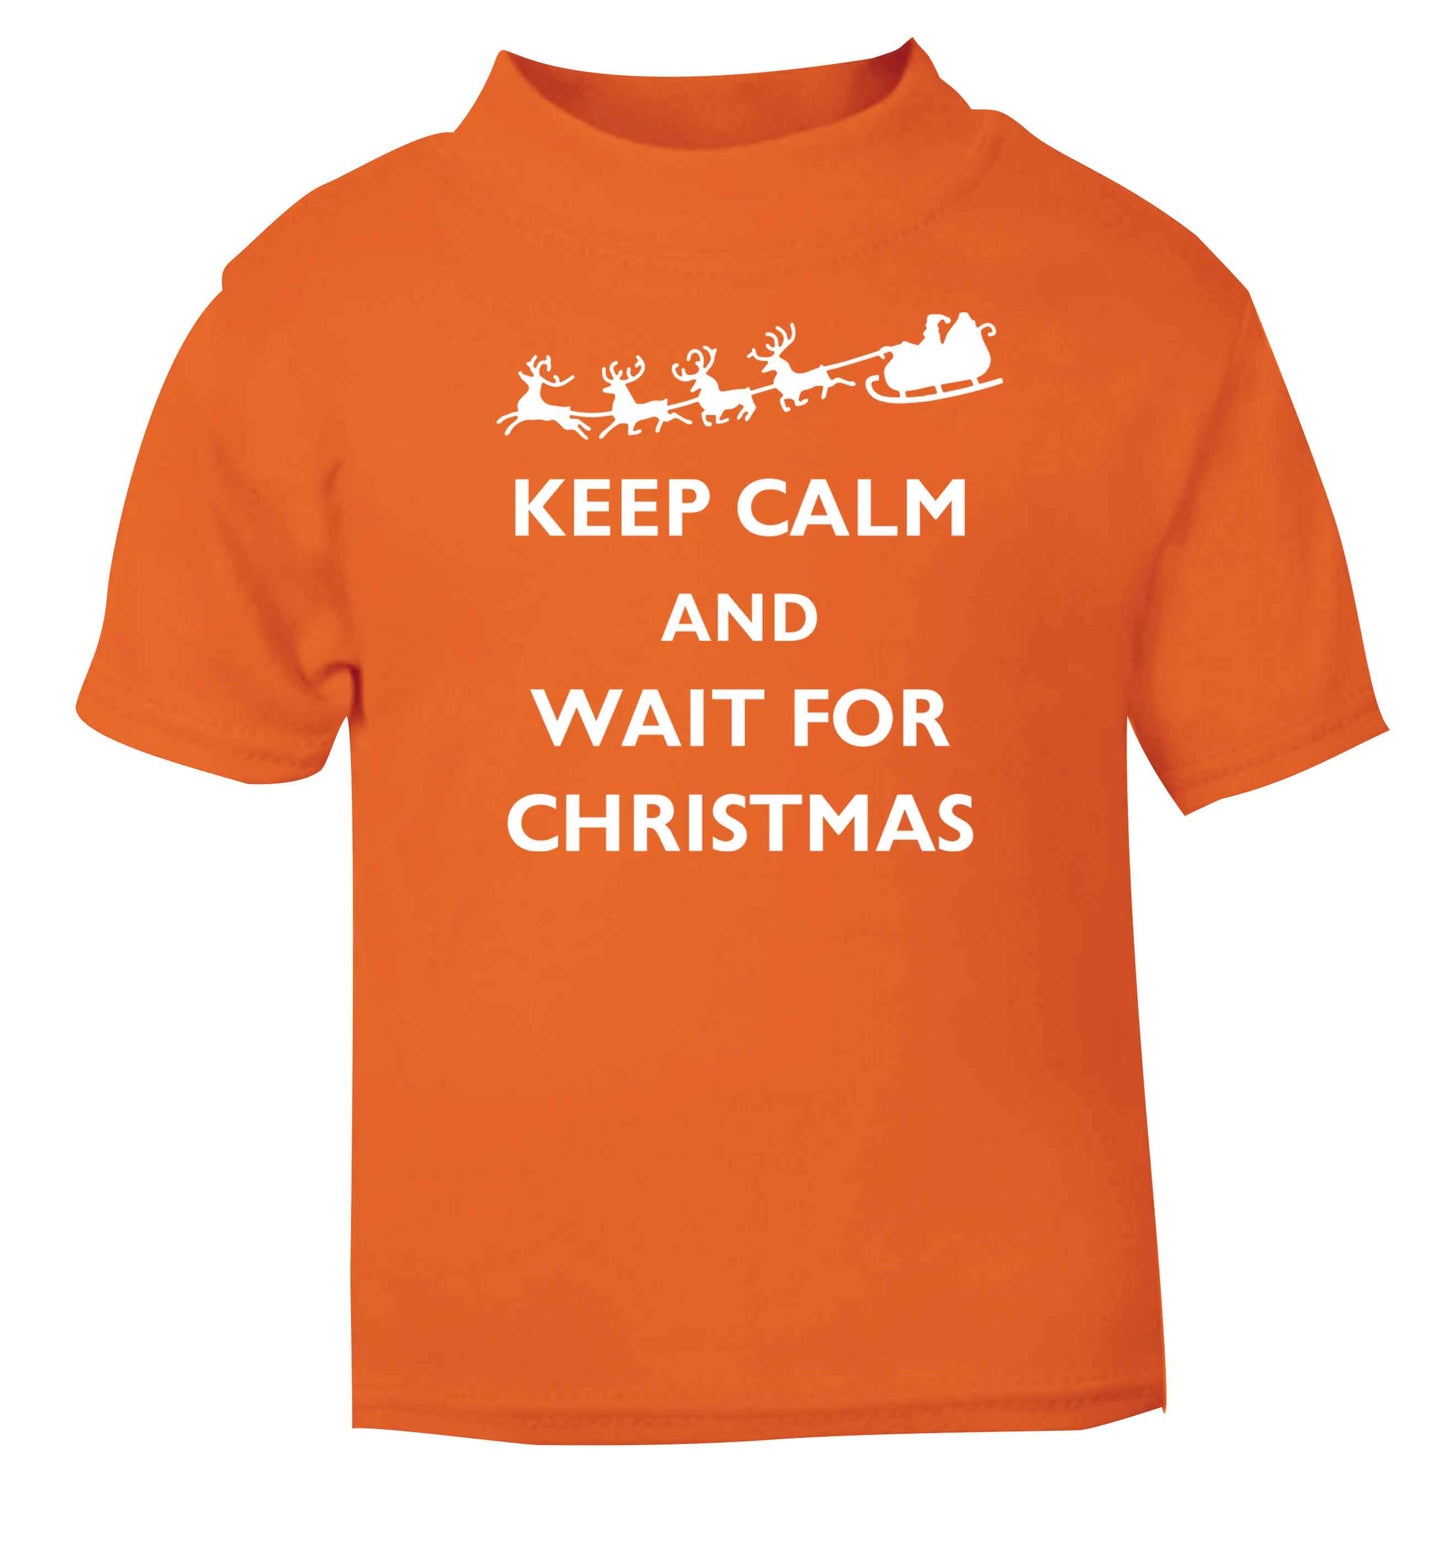 Keep calm and wait for Christmas orange baby toddler Tshirt 2 Years